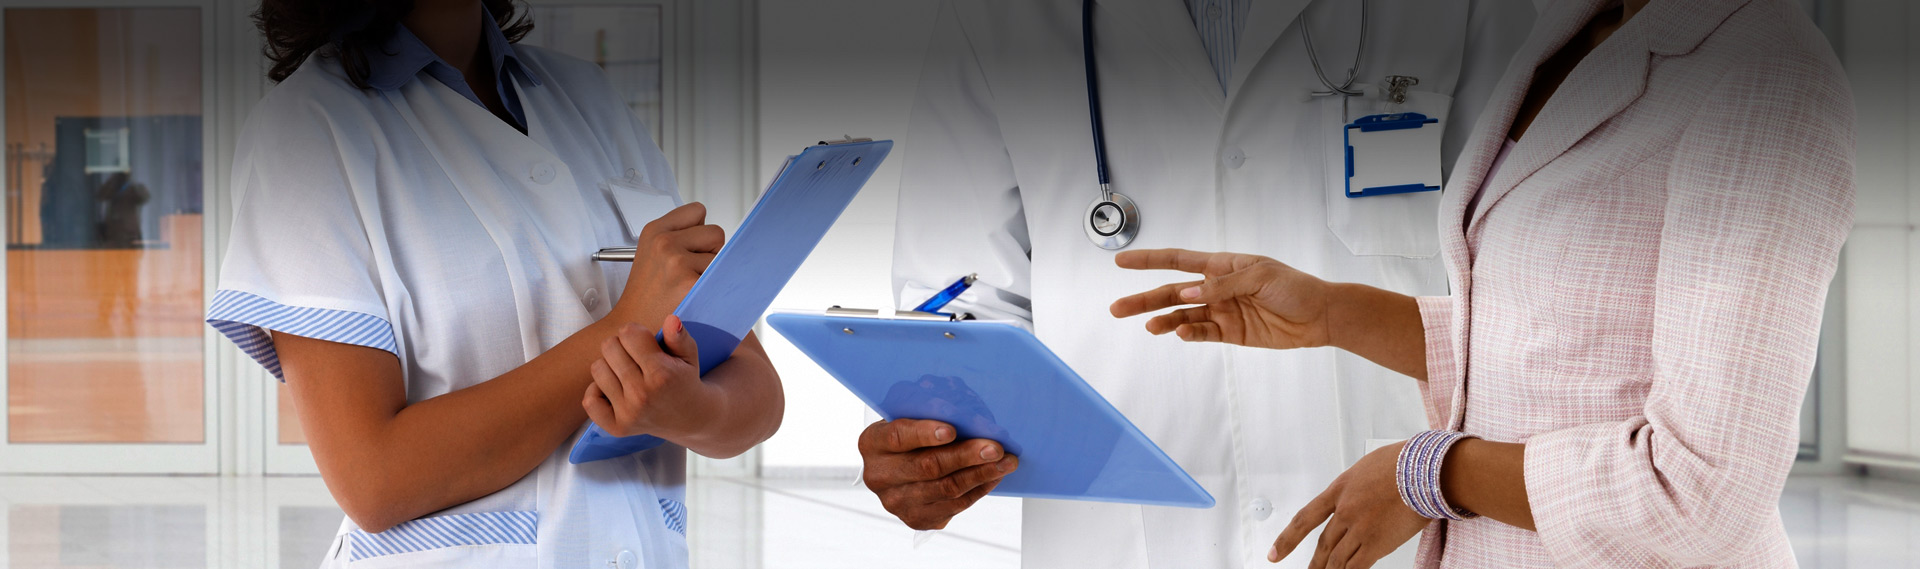 background - healthcare professional holding clipboards